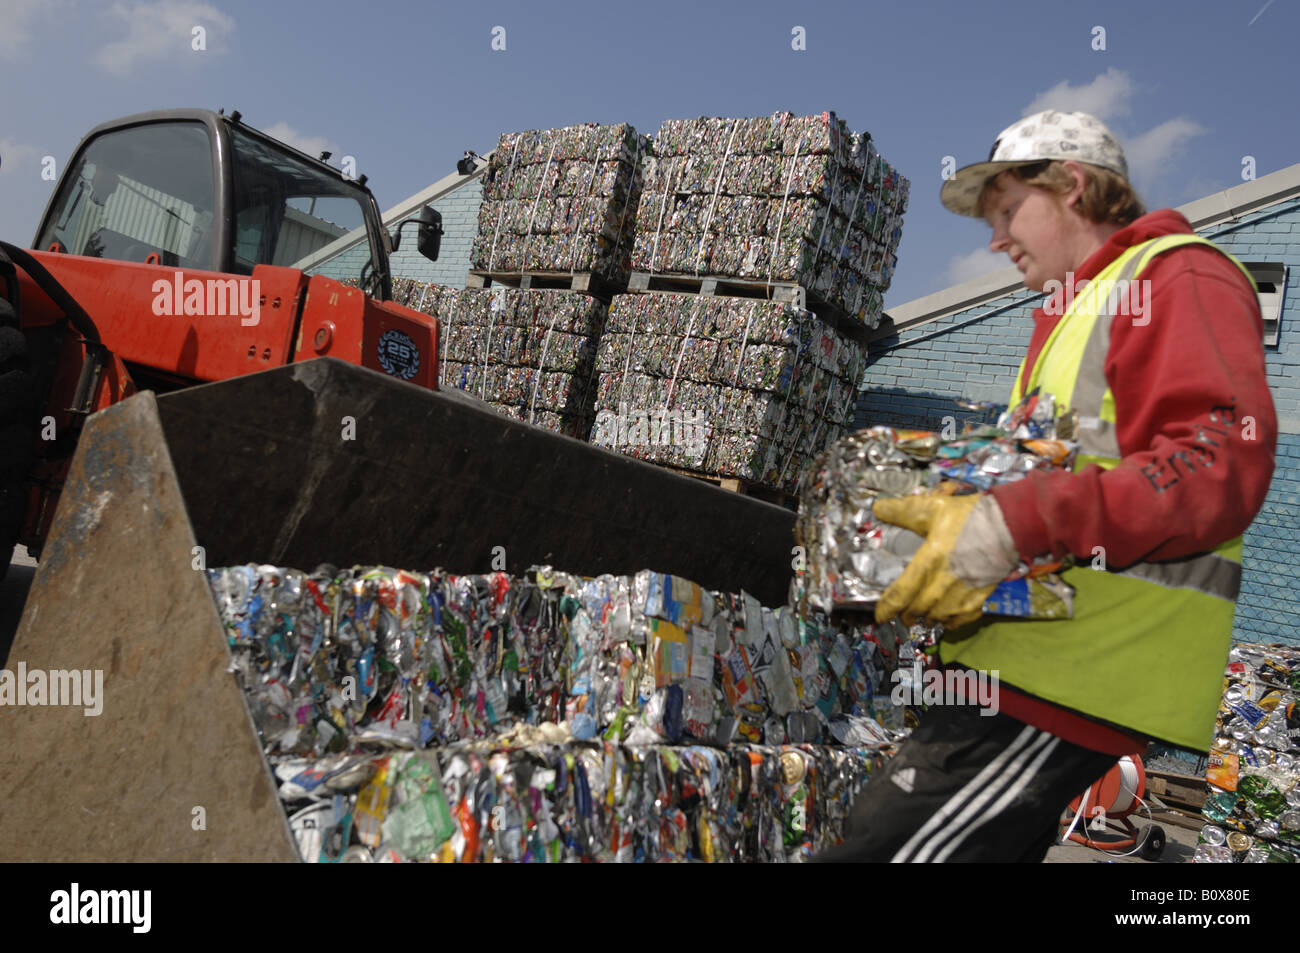 Aluminium and steel can recycling at Teignbridge district council recycling yard in Newton Abbot Devon Stock Photo